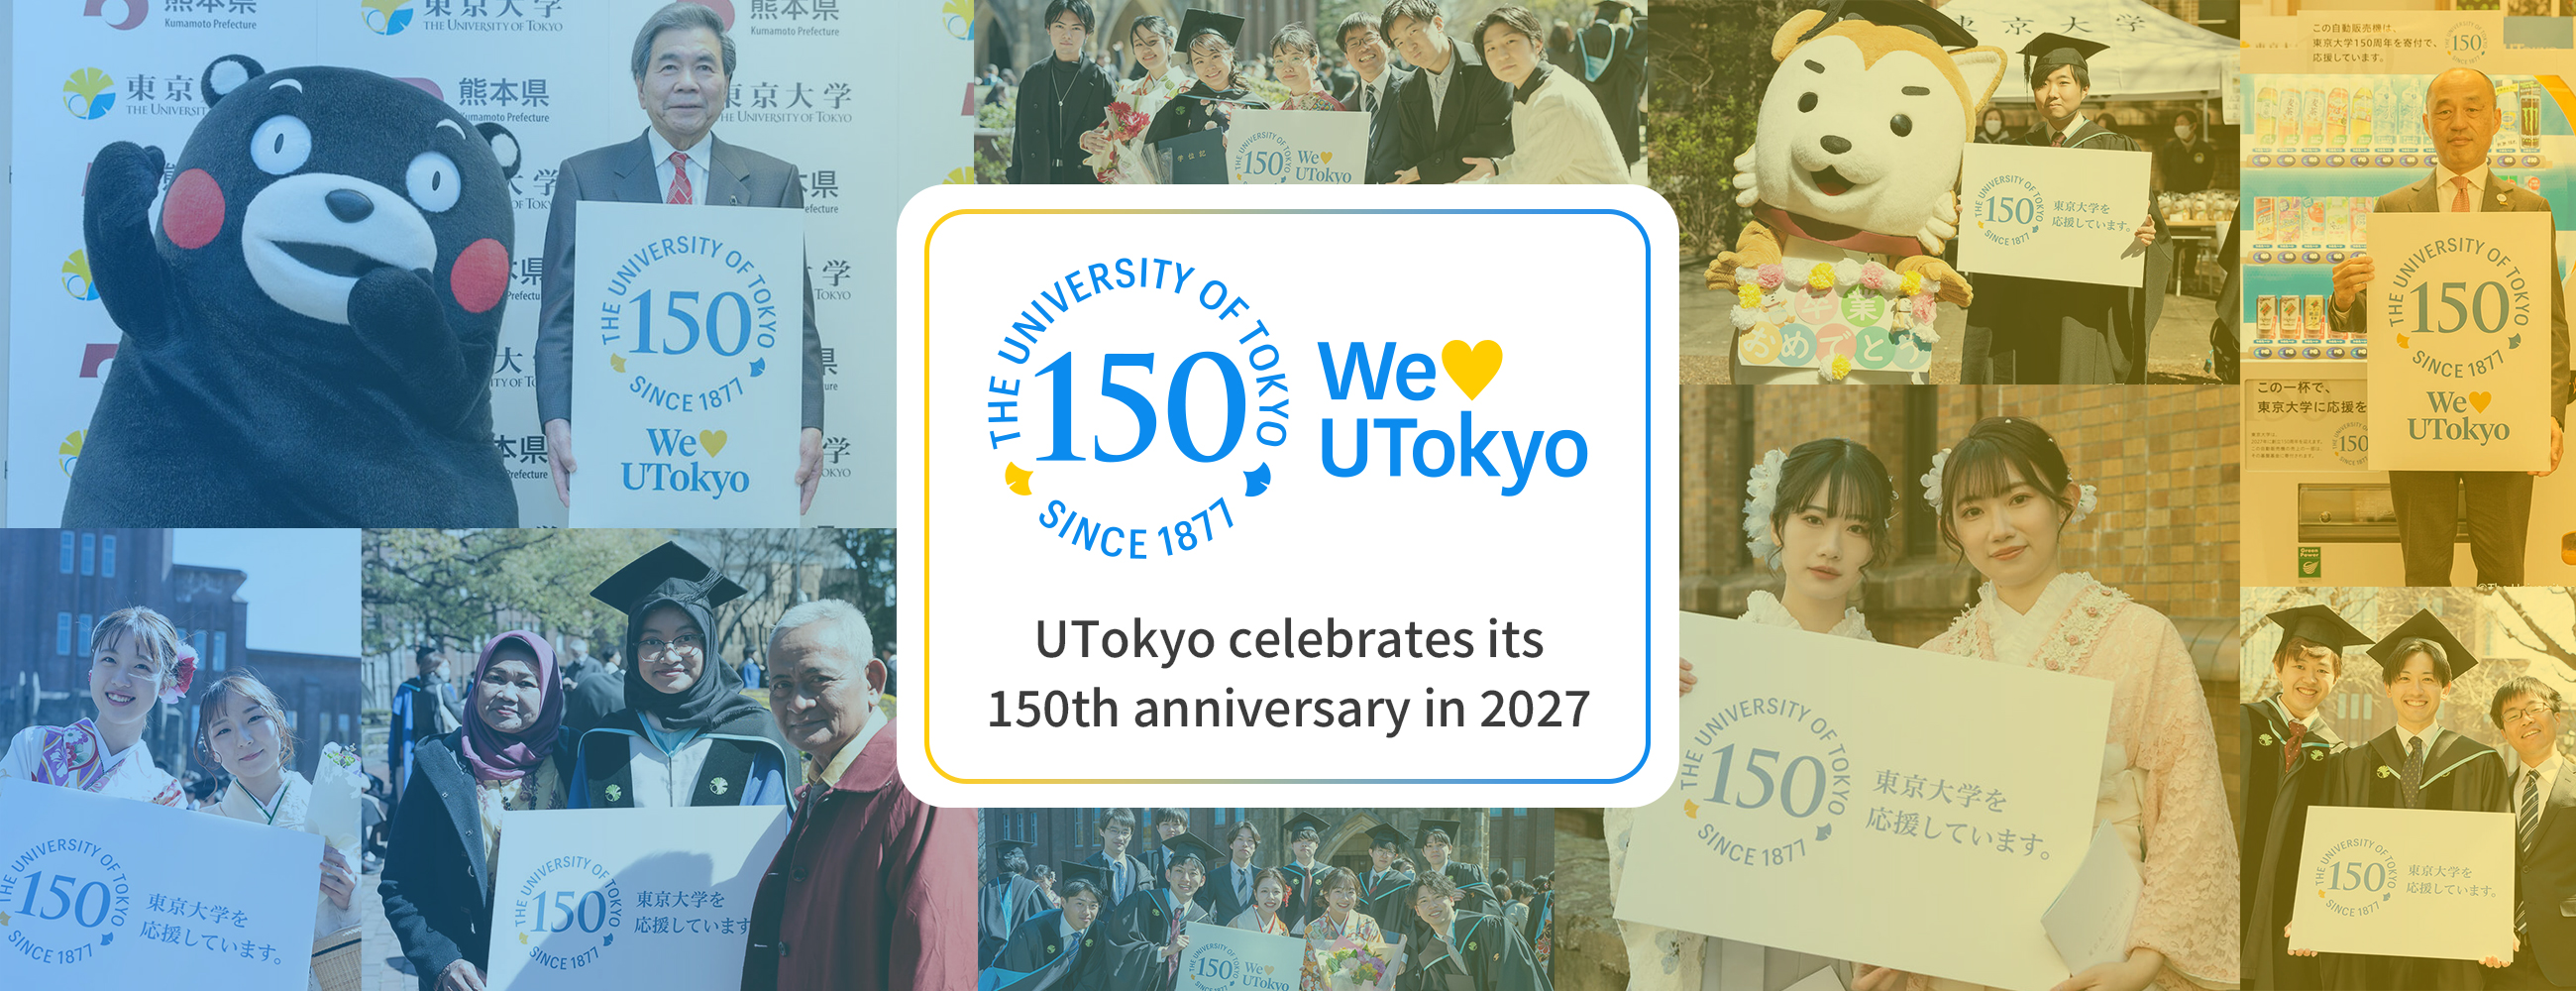 The University of Tokyo celebrates the 150th anniversary of its founding in 2027Open a new window